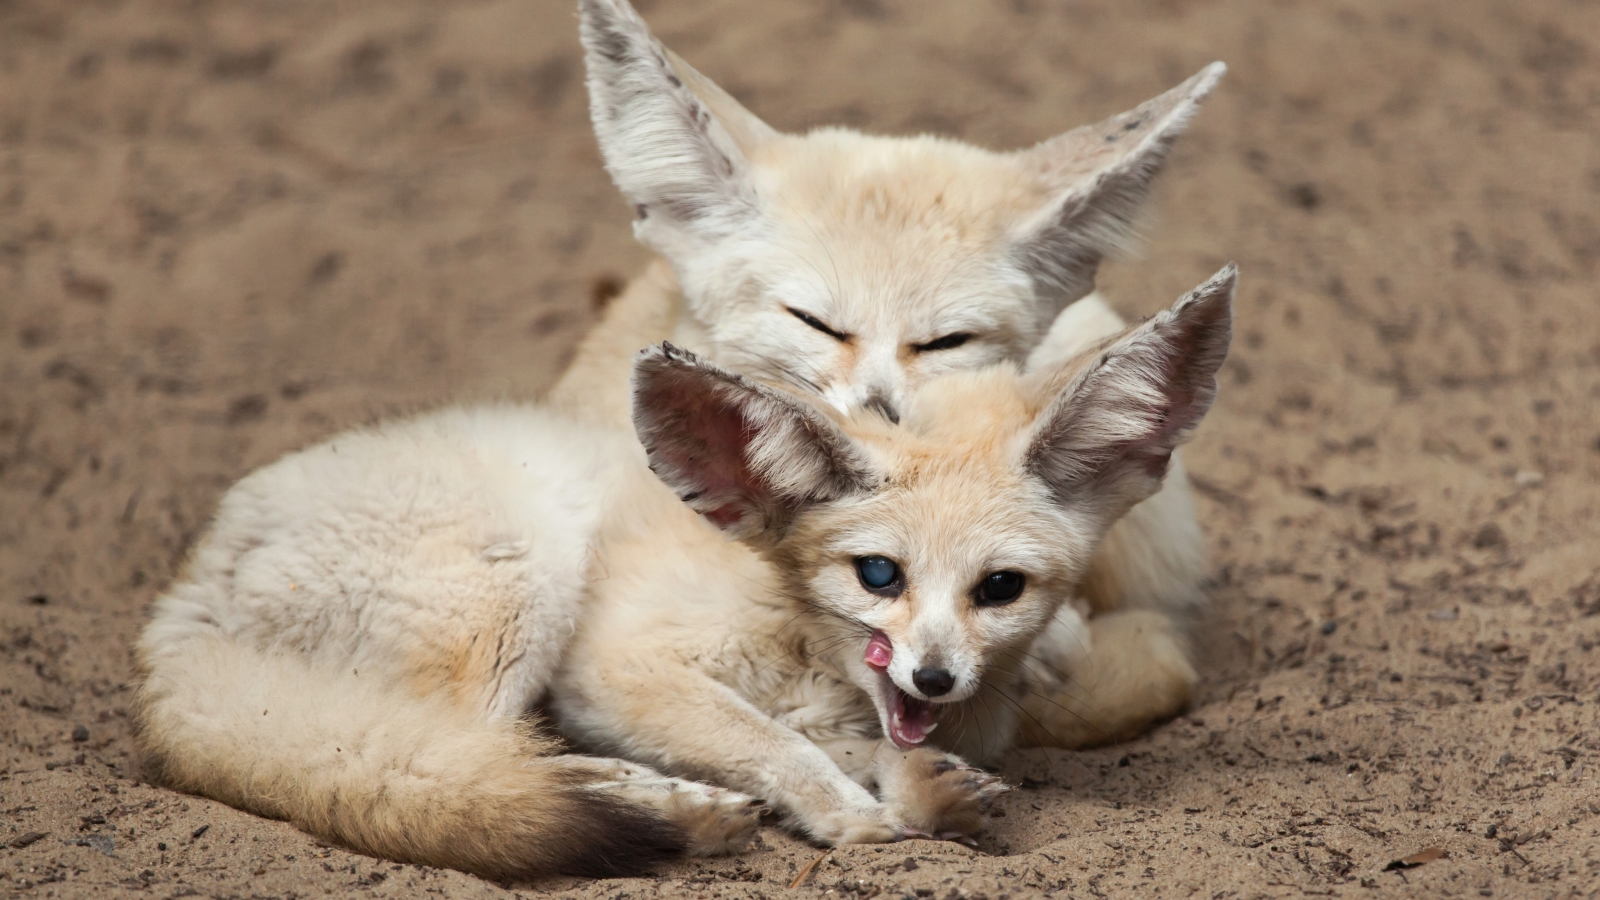 These fennec foxes may not have ventured out in daylight when dinosaurs were around. Photo by Vladimir Wrangel/Shutterstock.com